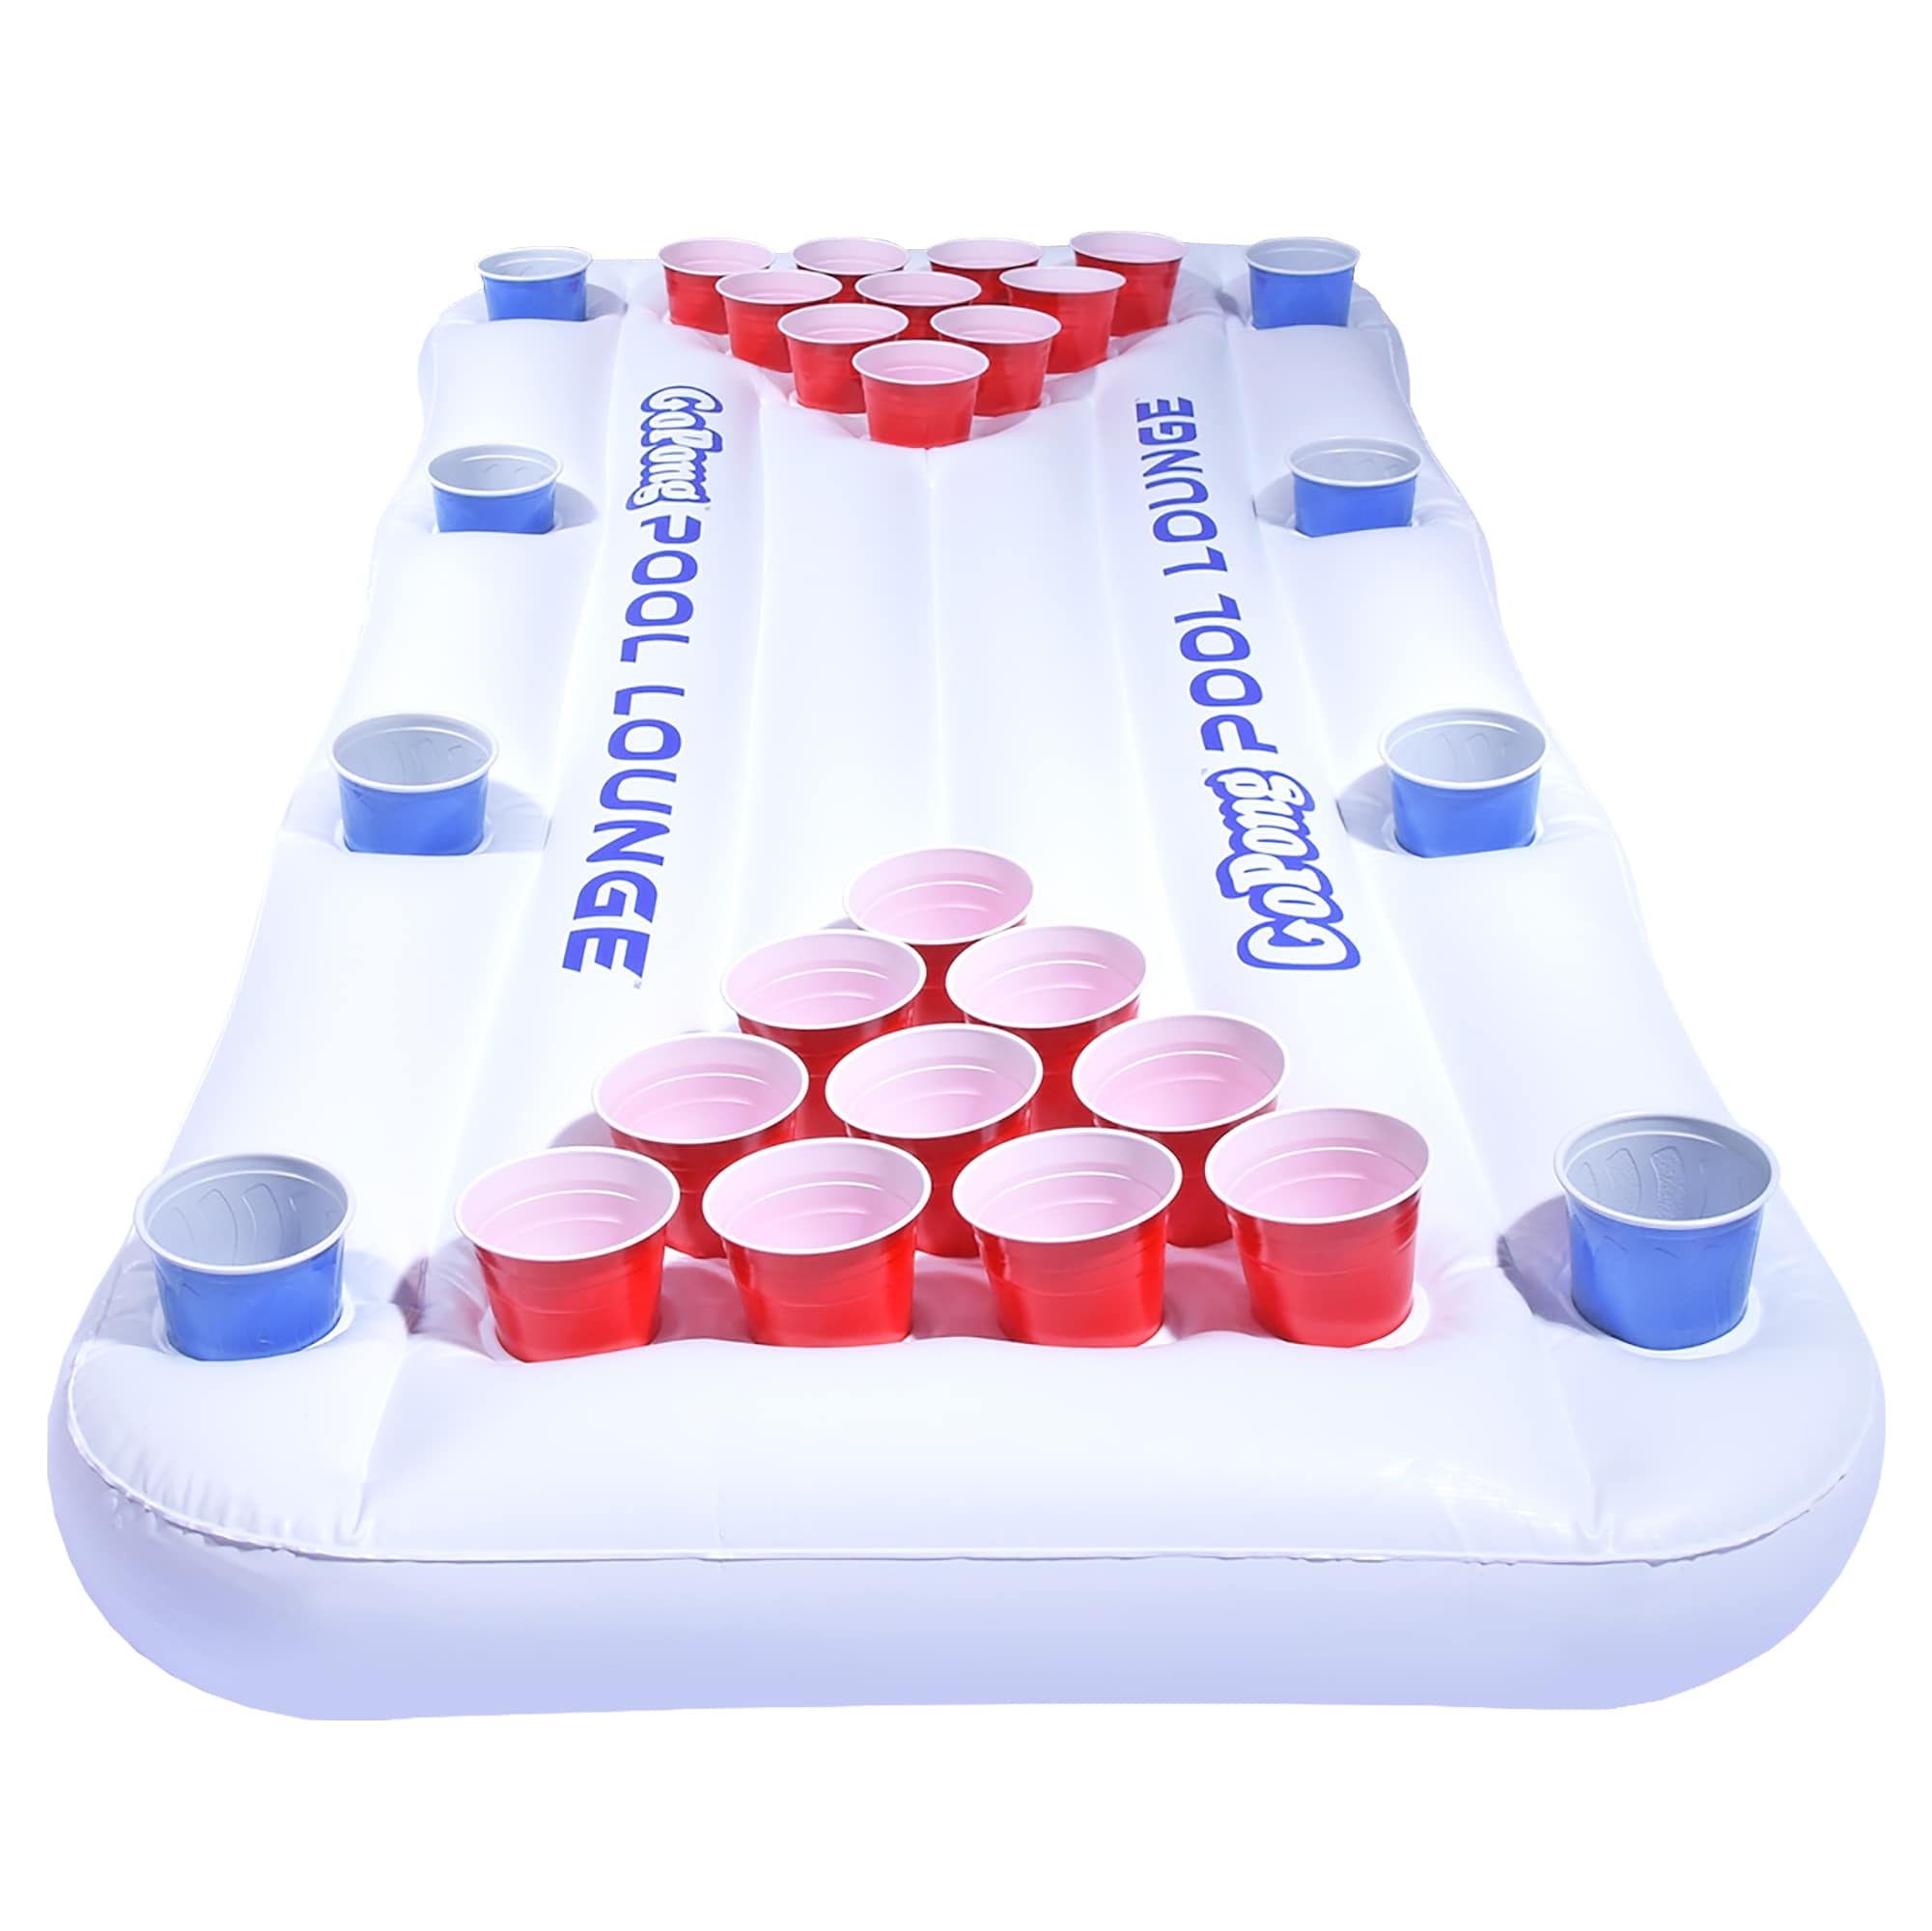 8-Foot Professional Beer Pong Table w/ Cup Holes - Beer Pong Edition 